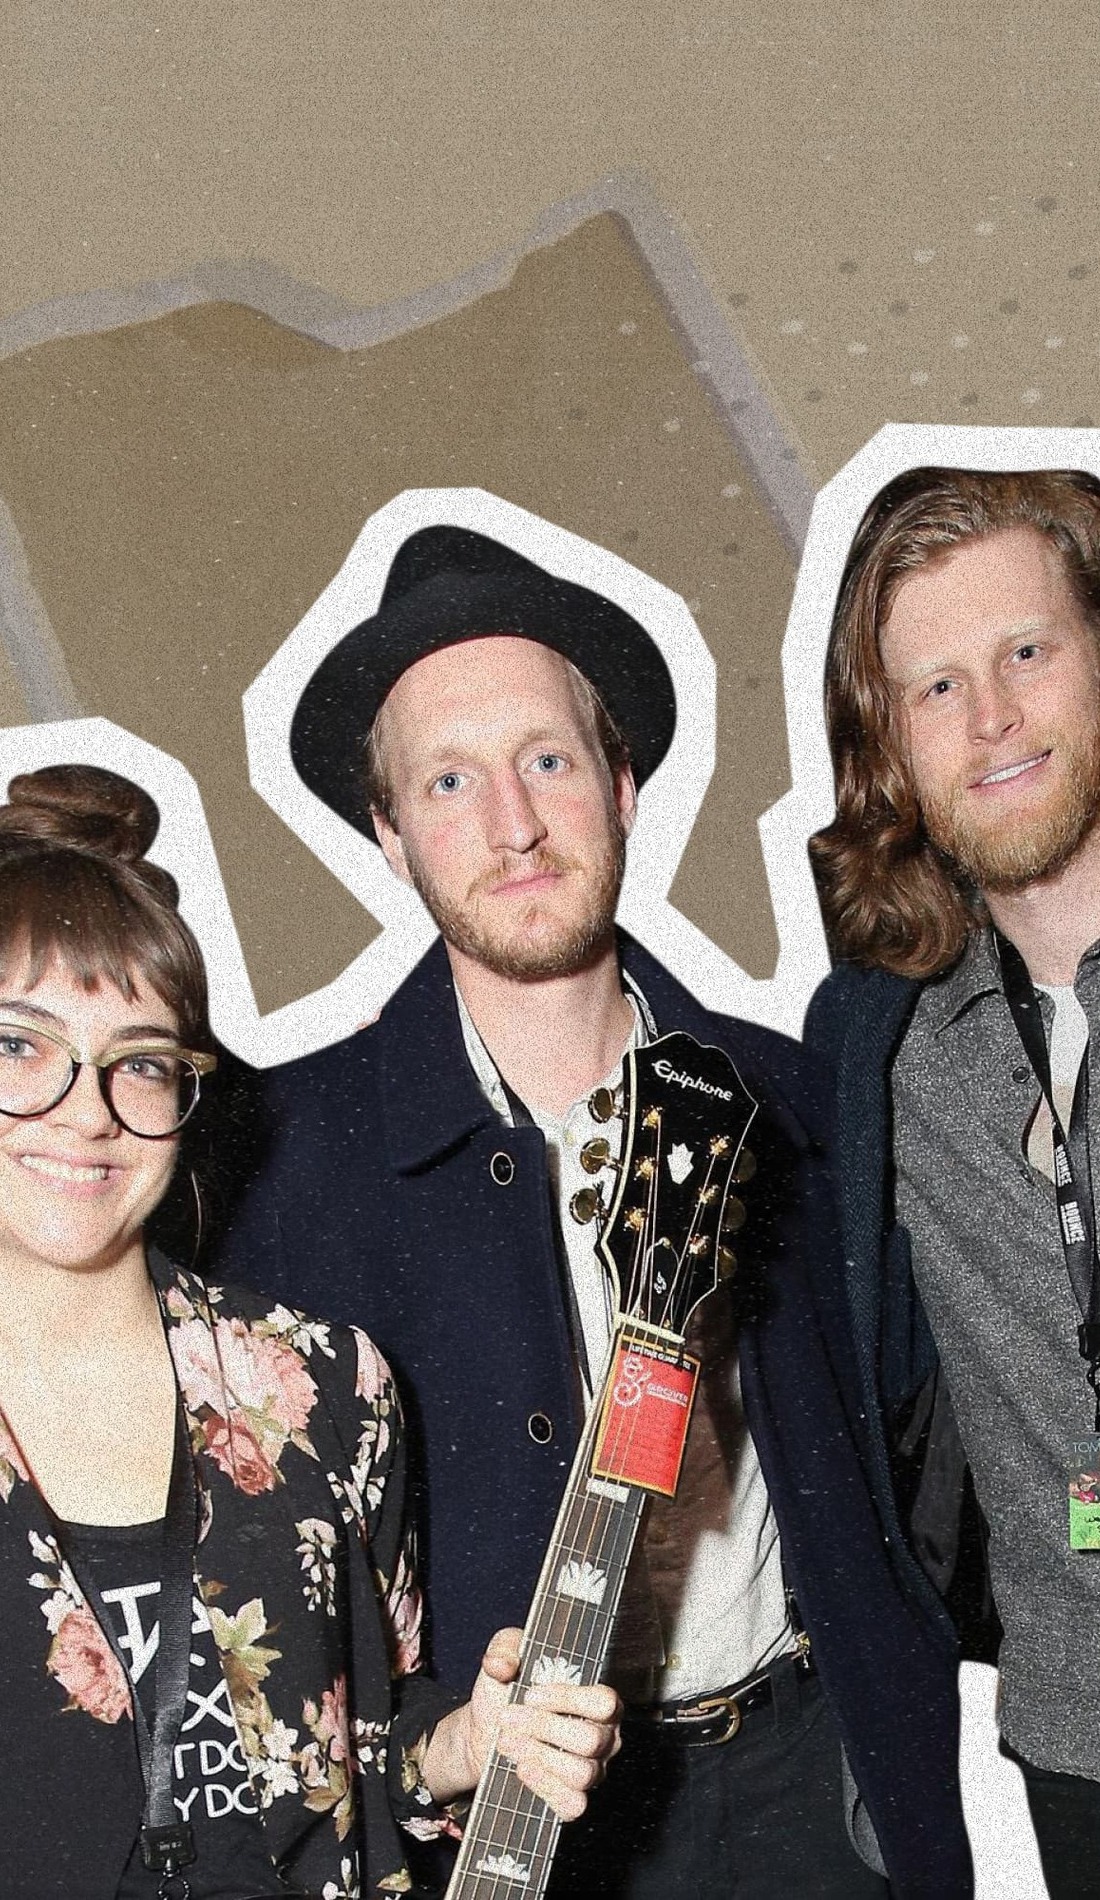 A The Lumineers live event